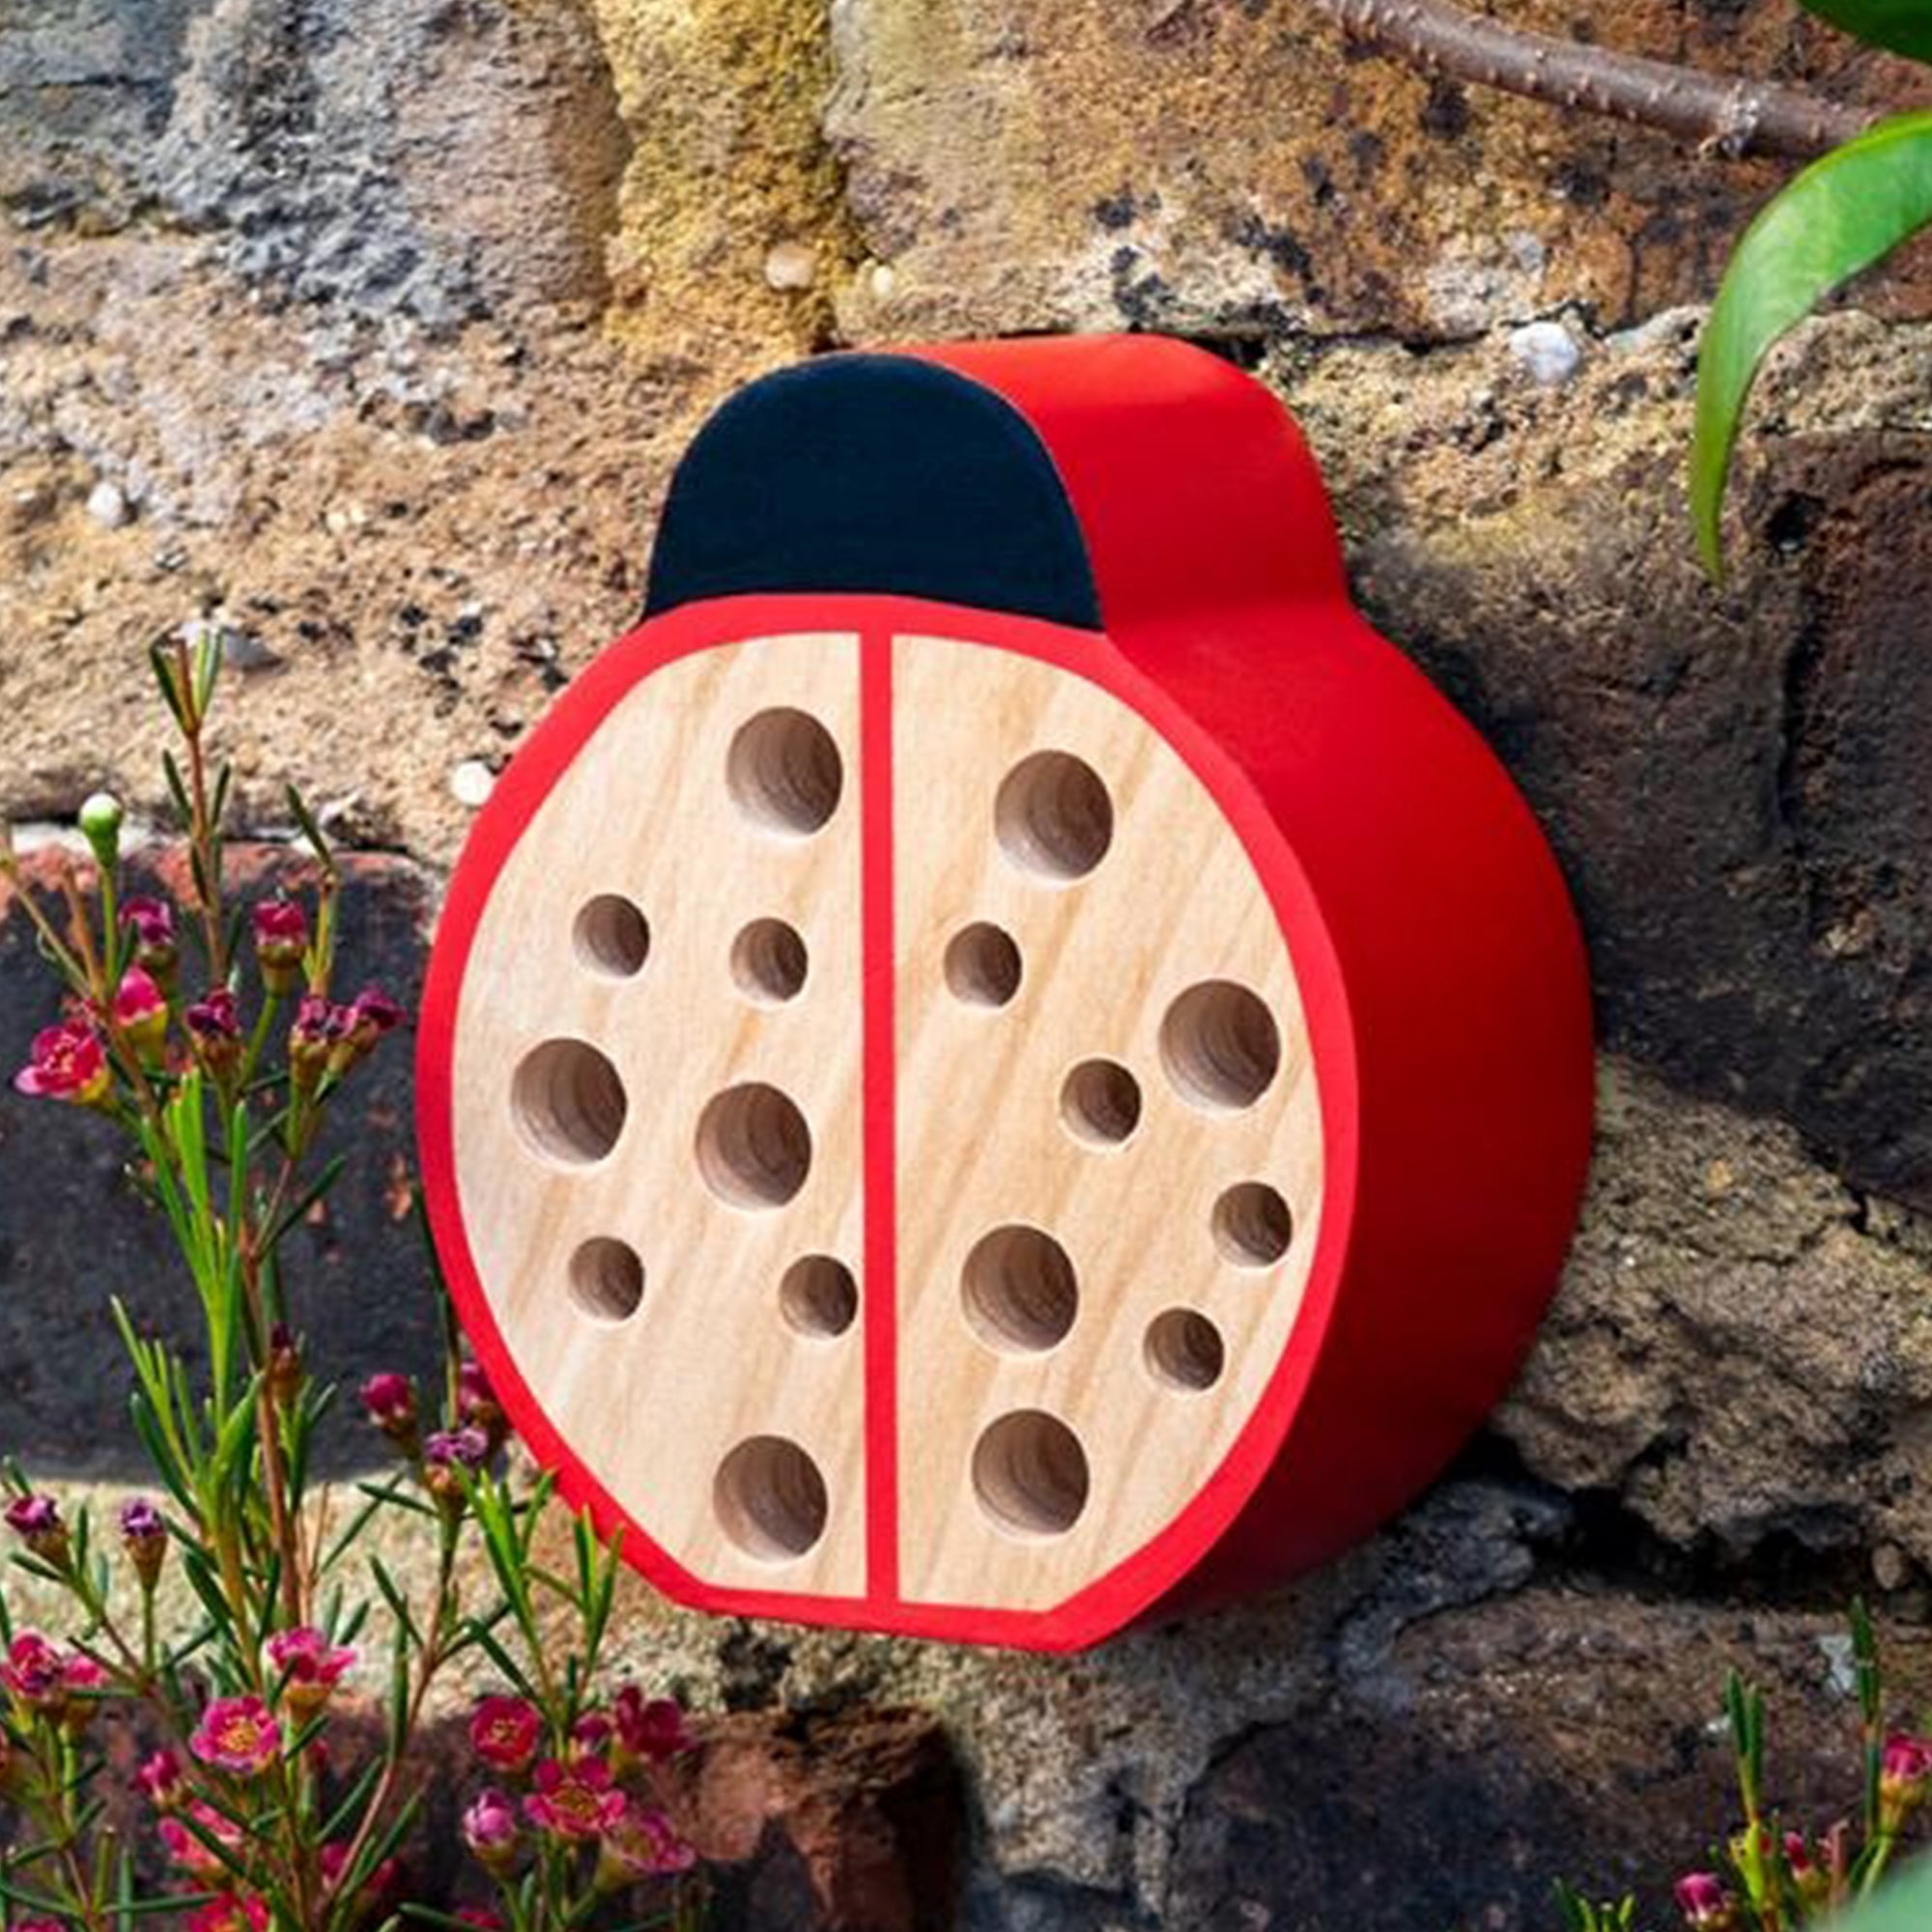 Ladybird Bug Hotel - Lady Bird Insect House - Gifts for Gardeners